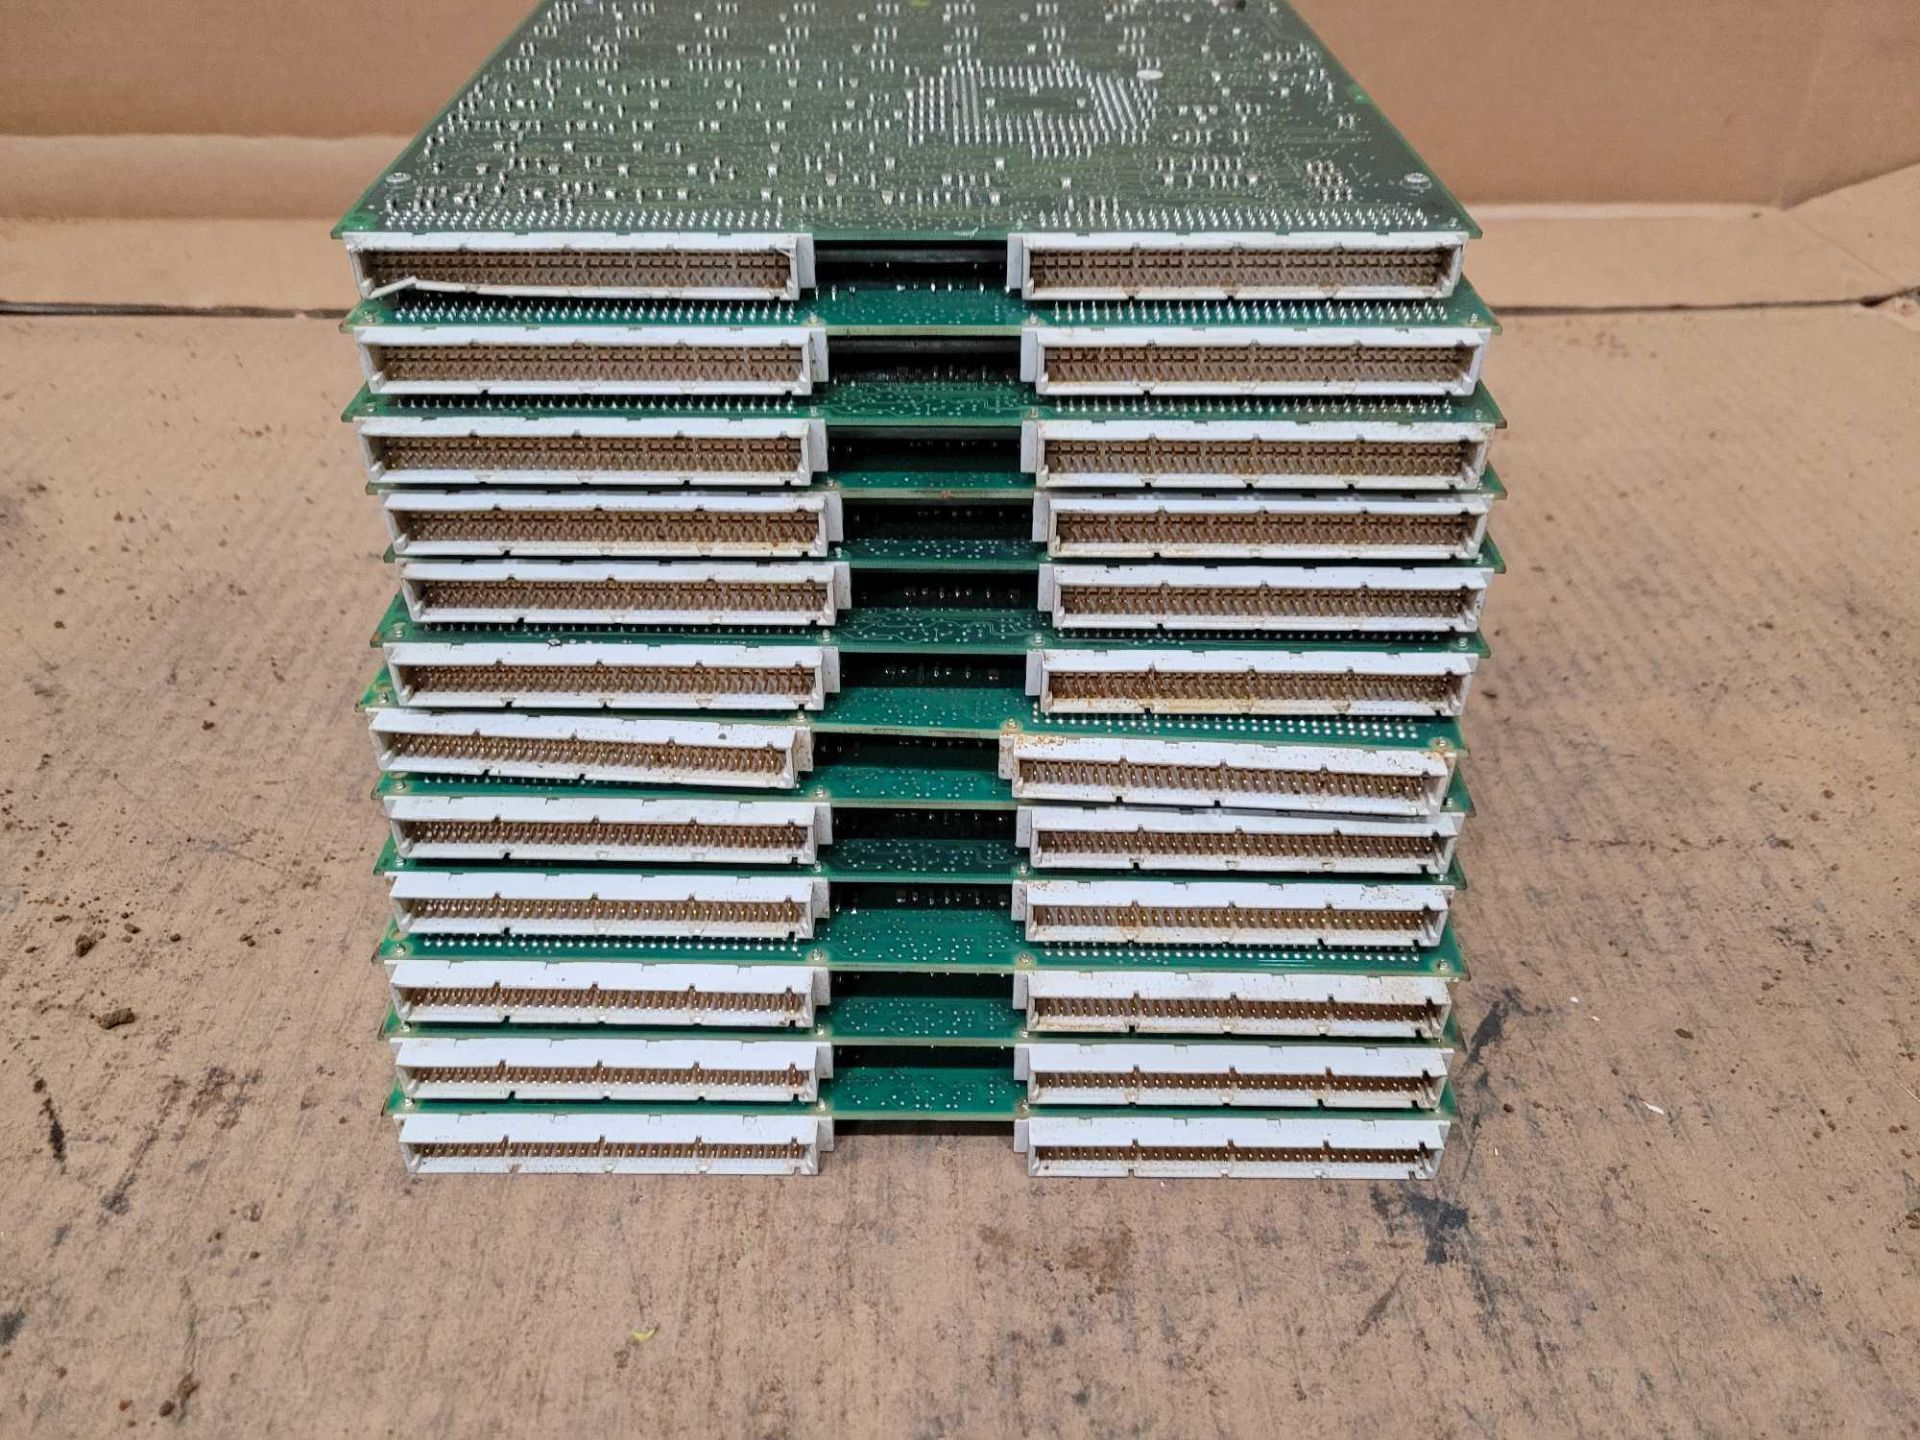 LOT OF 12 3HAB2241-1 PCB CIRCUIT BOARD - Image 6 of 8